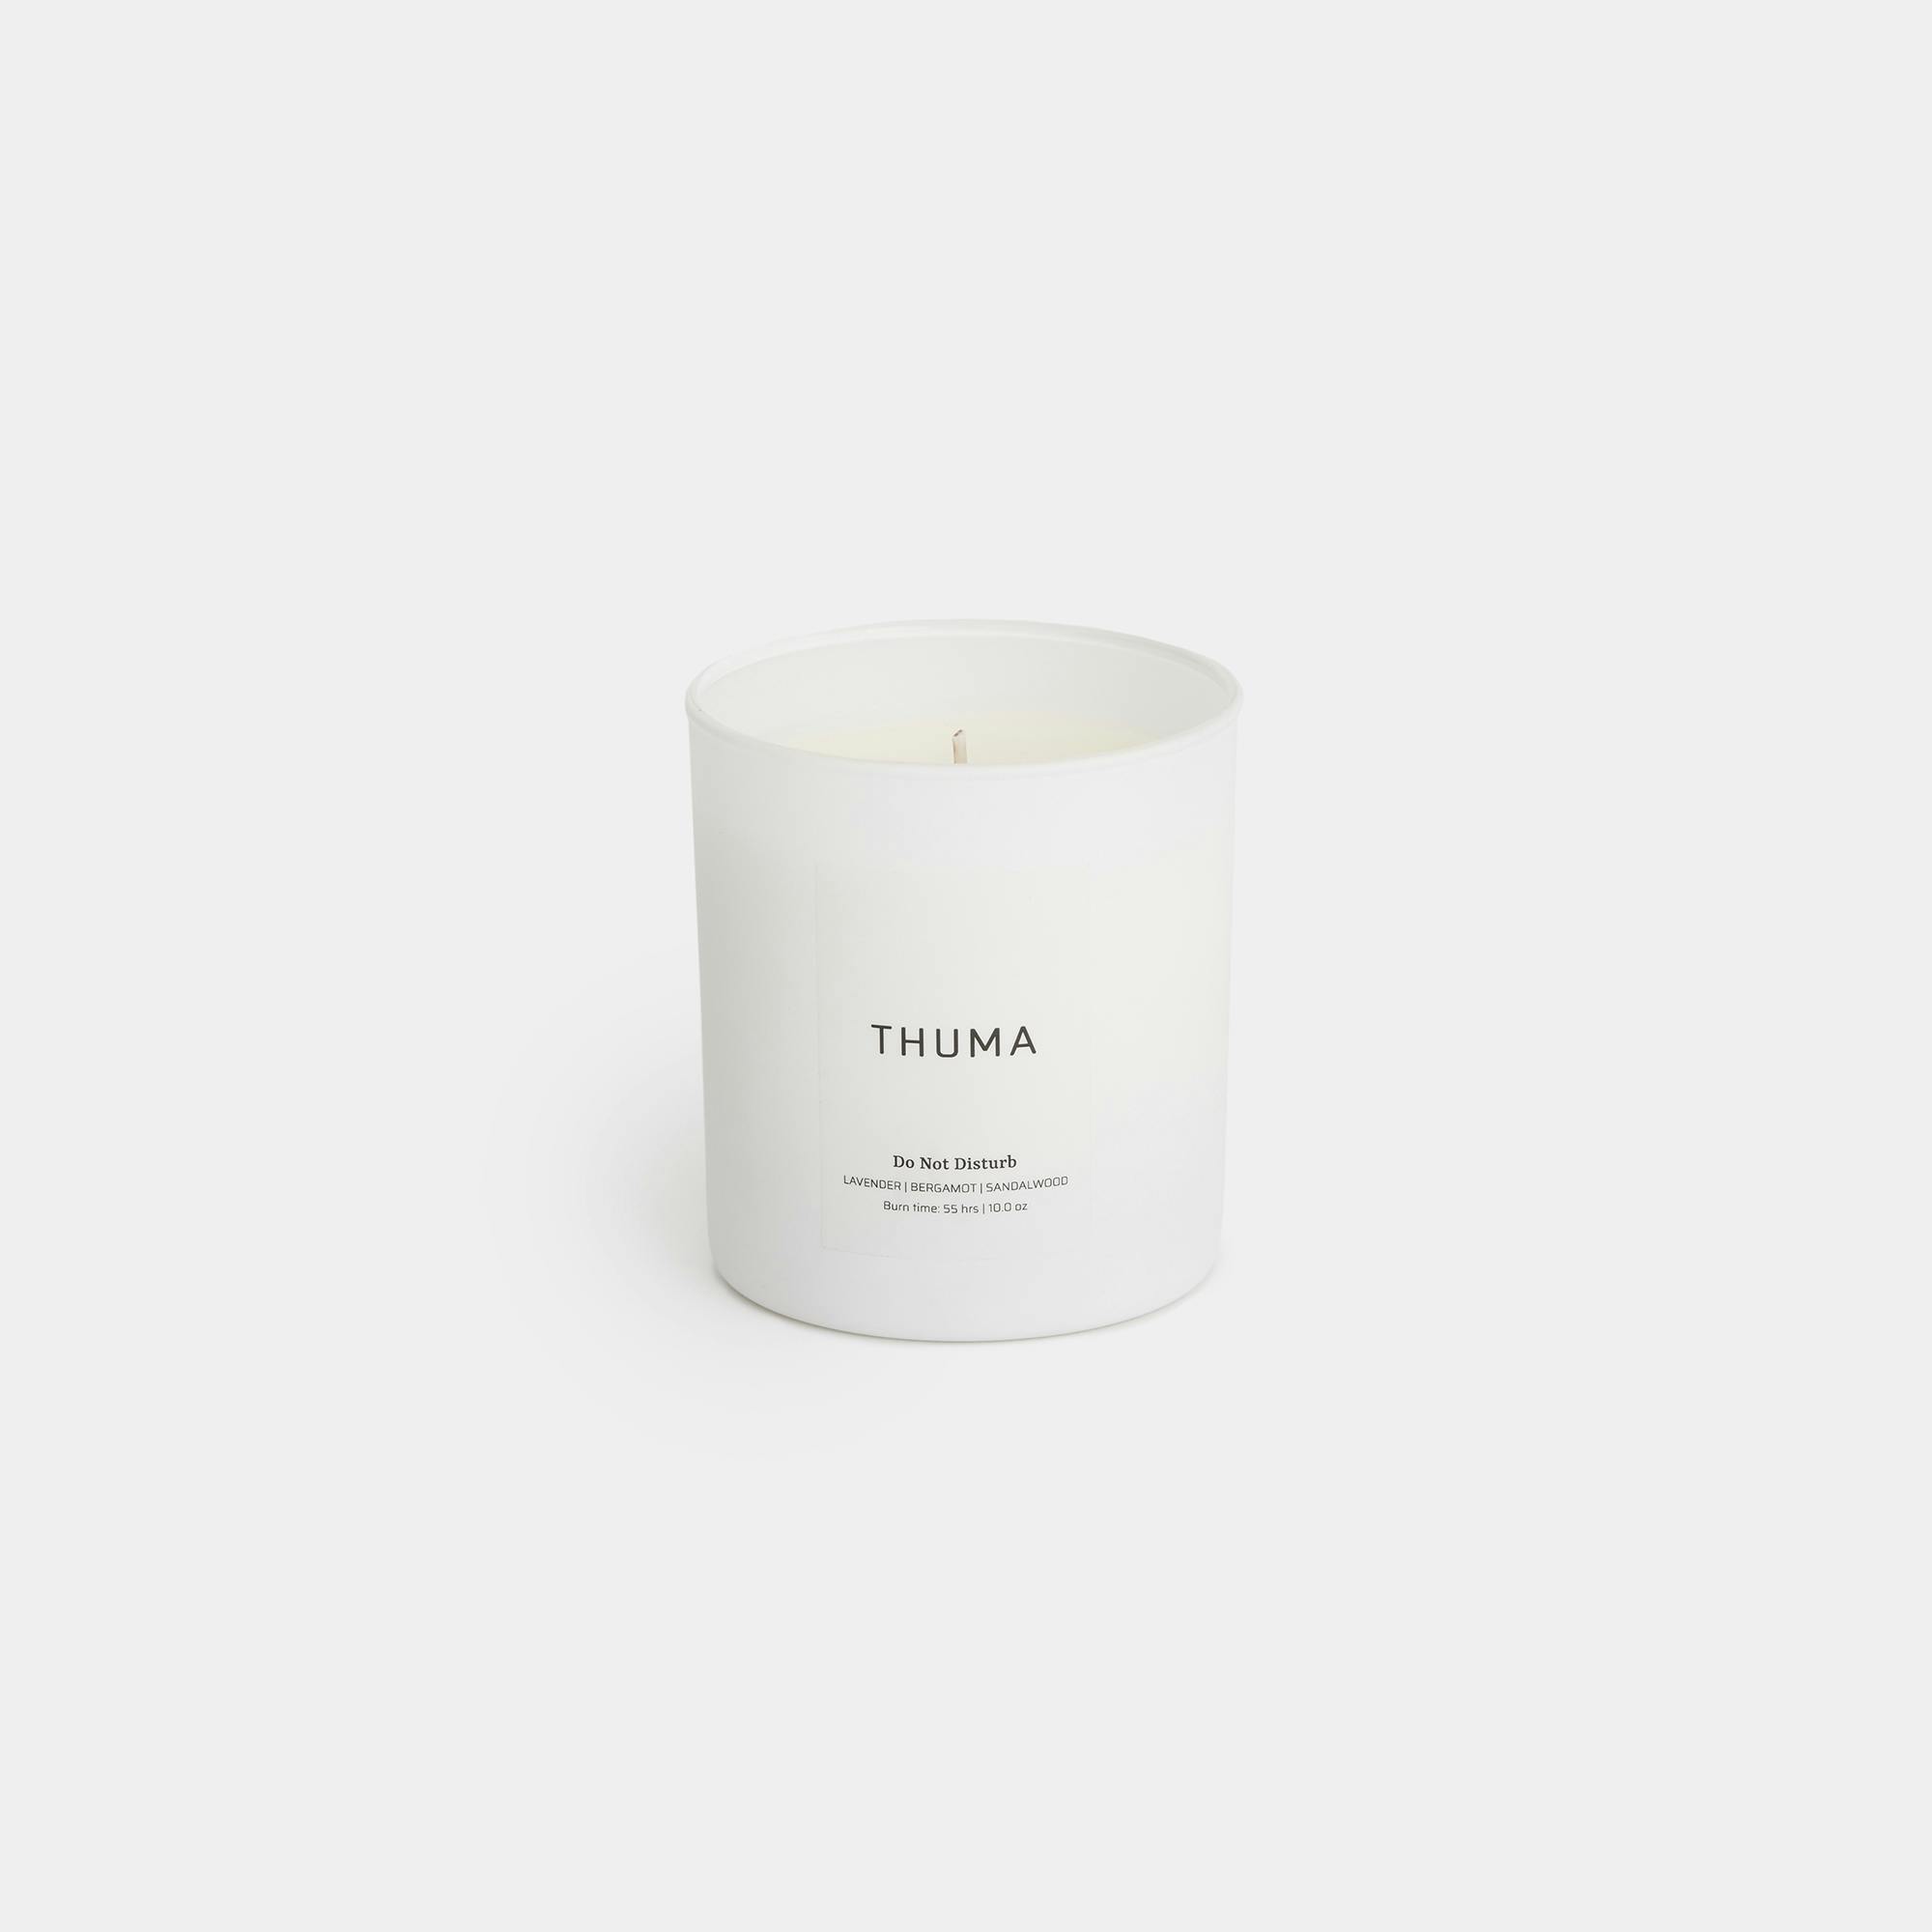 Do Not Disturb Candle (10 oz) - 1:1 - Front